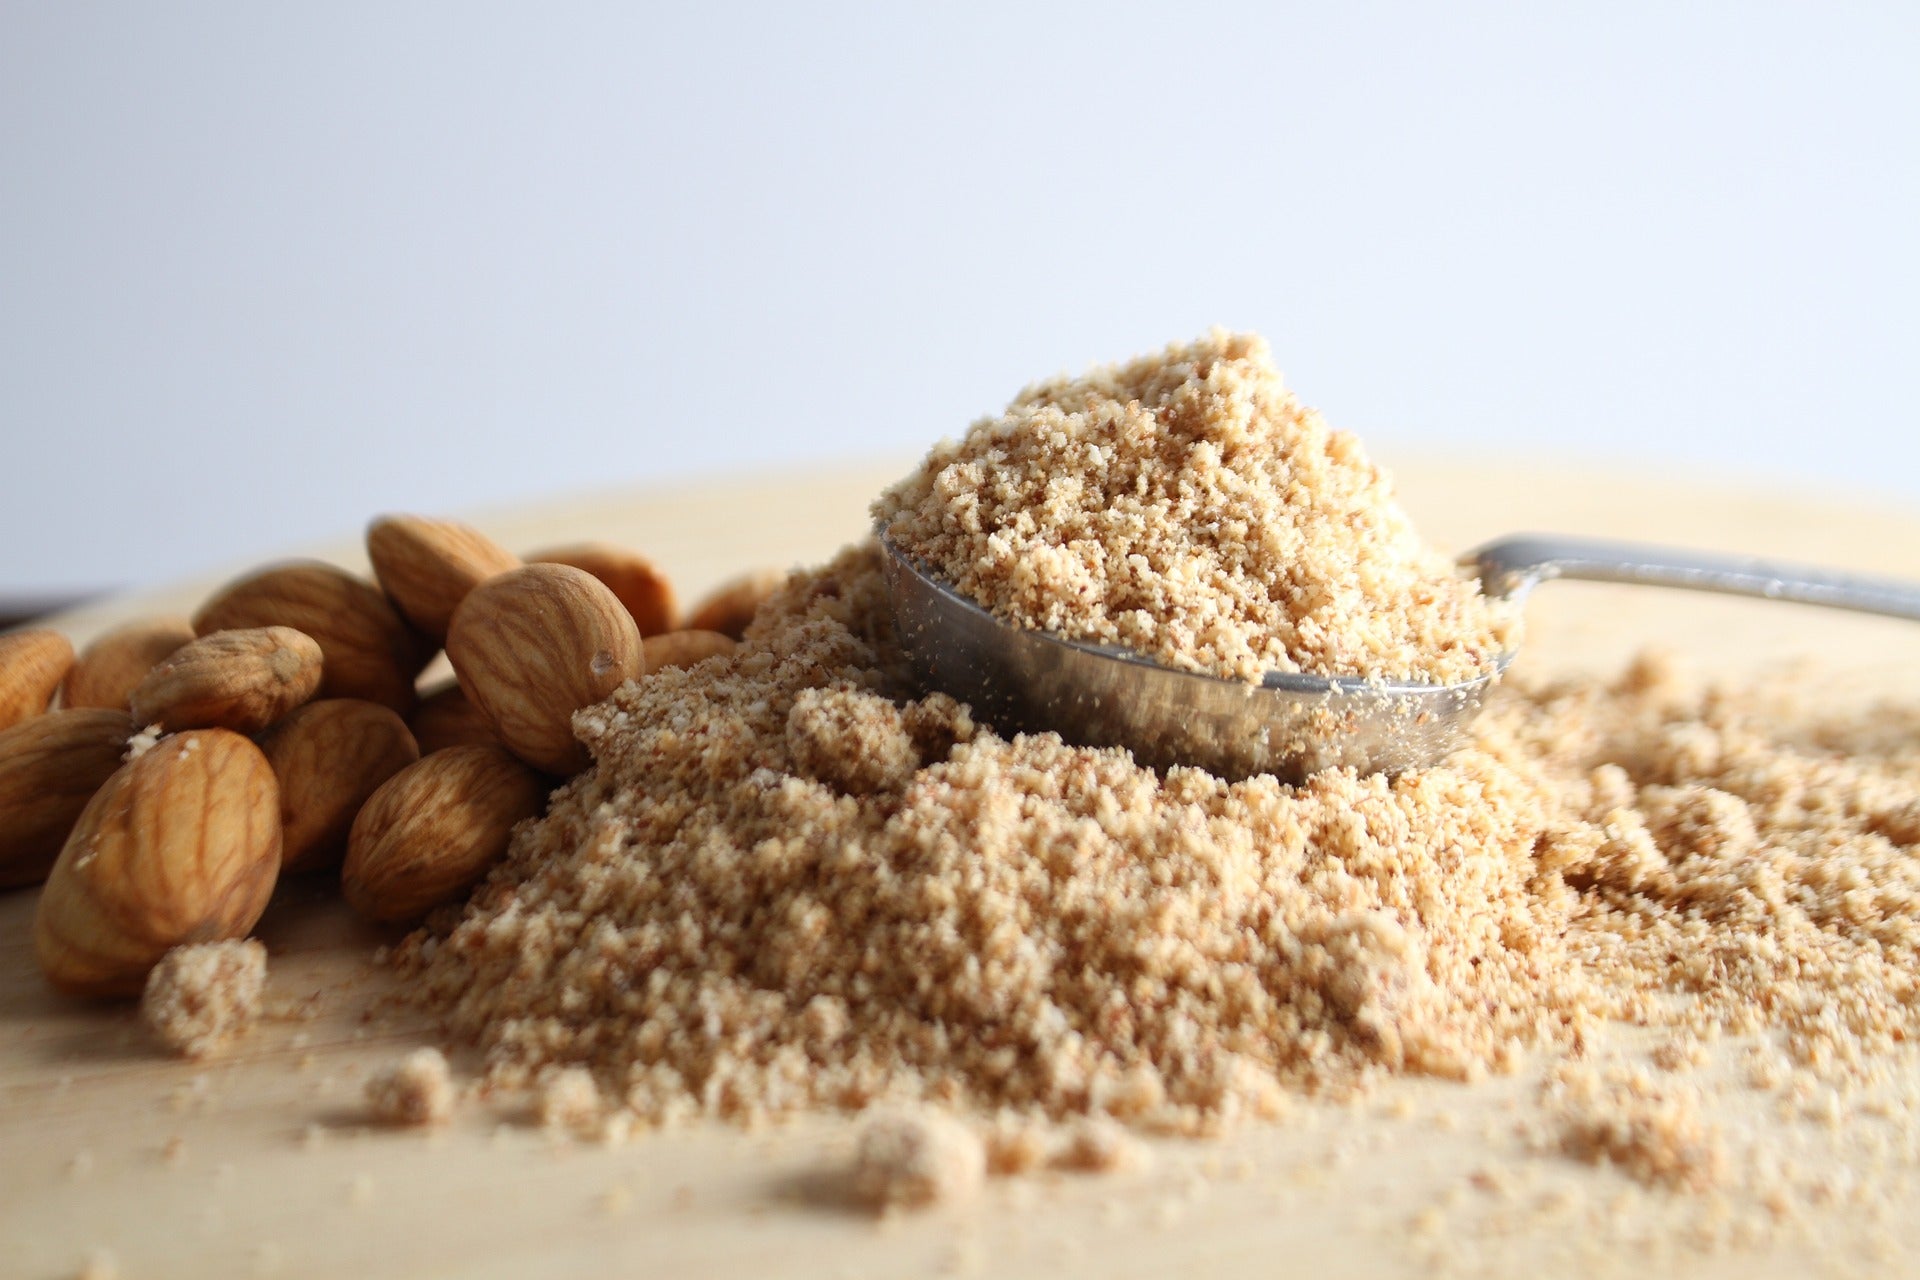 Almond flour and whole almonds